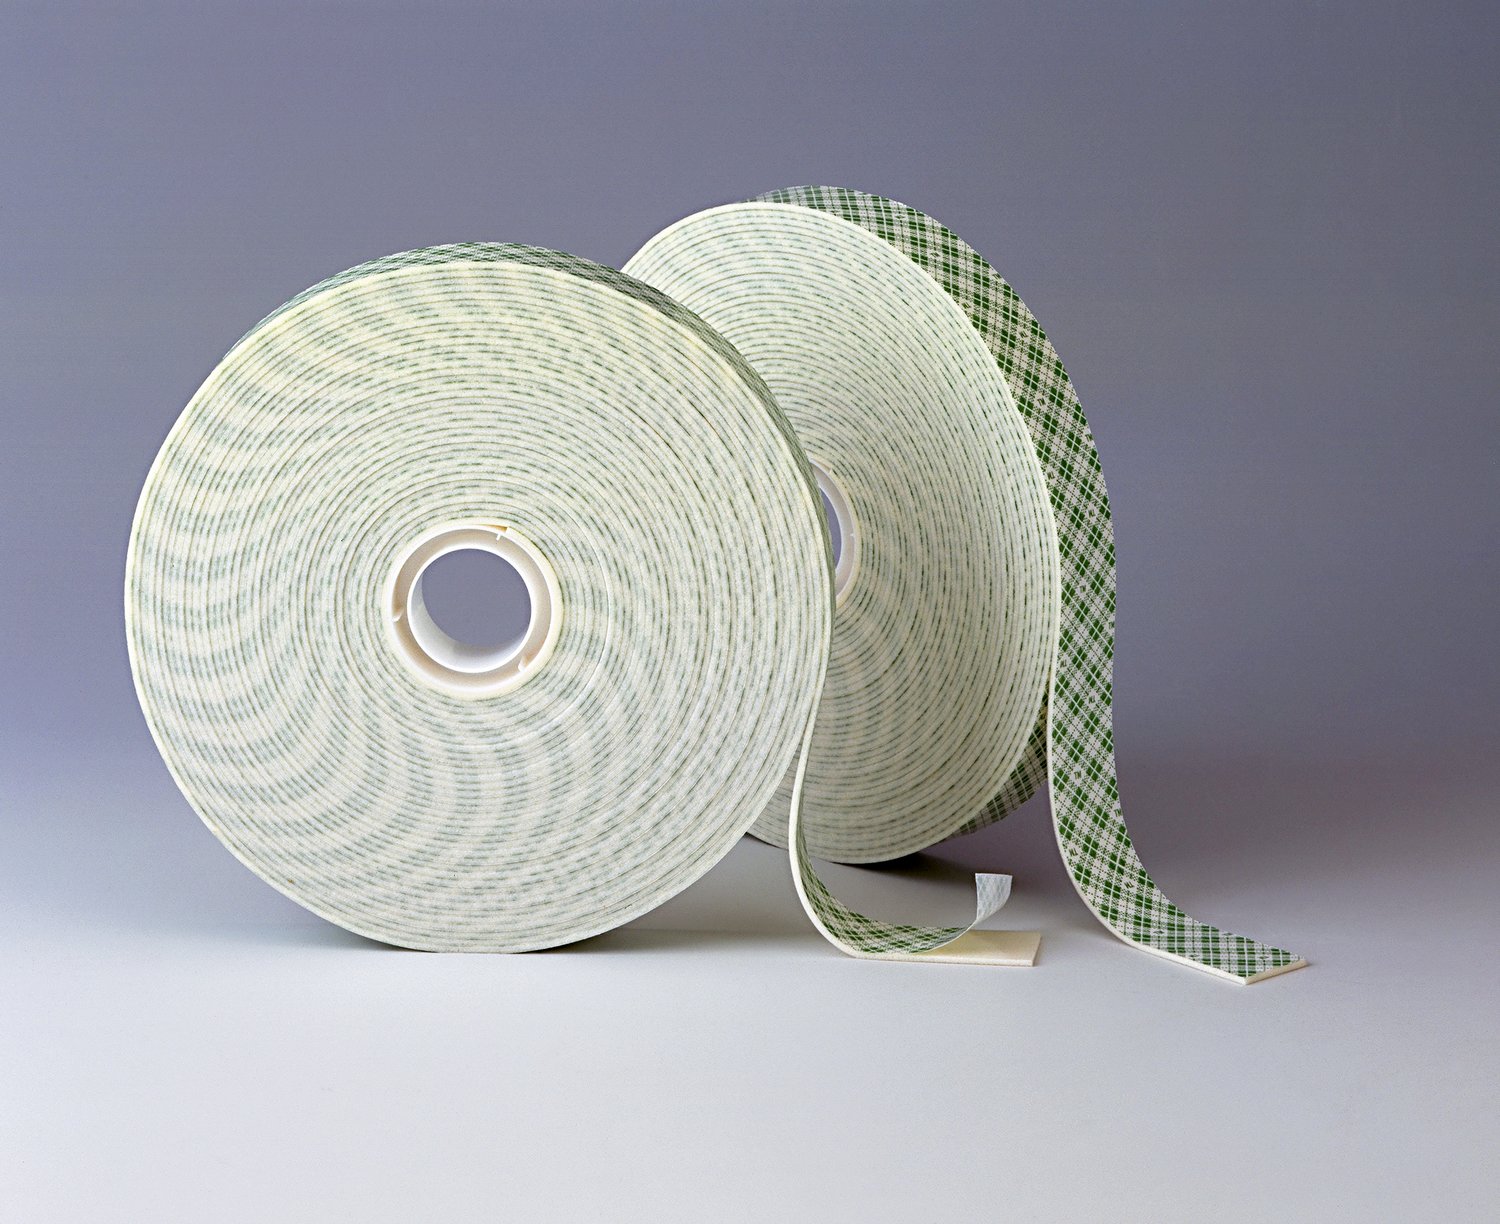 7100014133 - 3M Double Coated Urethane Foam Tape 4026, Natural, 3 in x 36 yd, 62
mil, 3 Rolls/Case